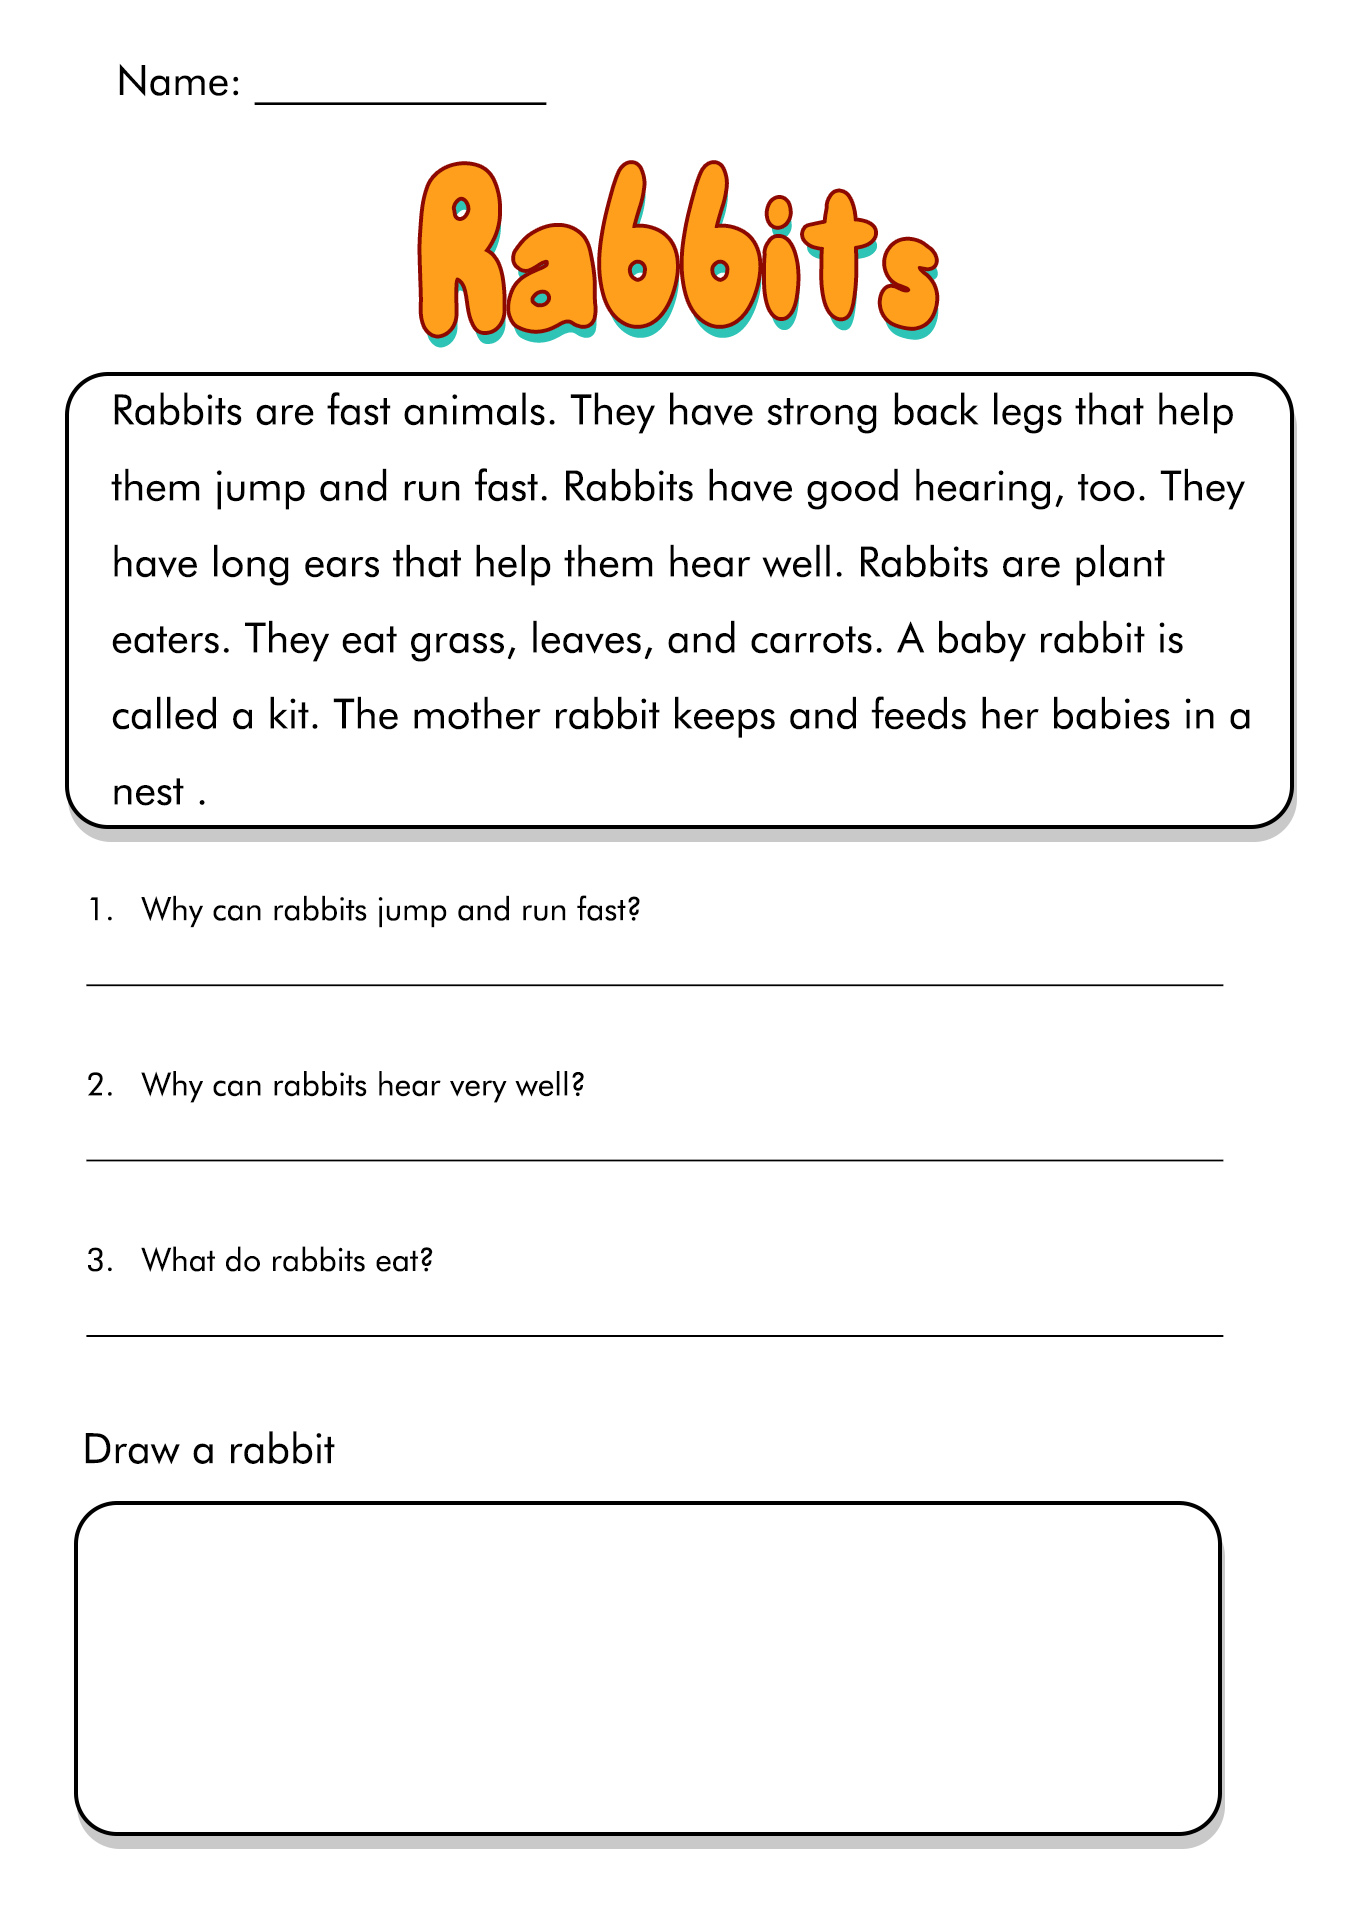 12 Best Images of English Primary 1 Worksheet ...